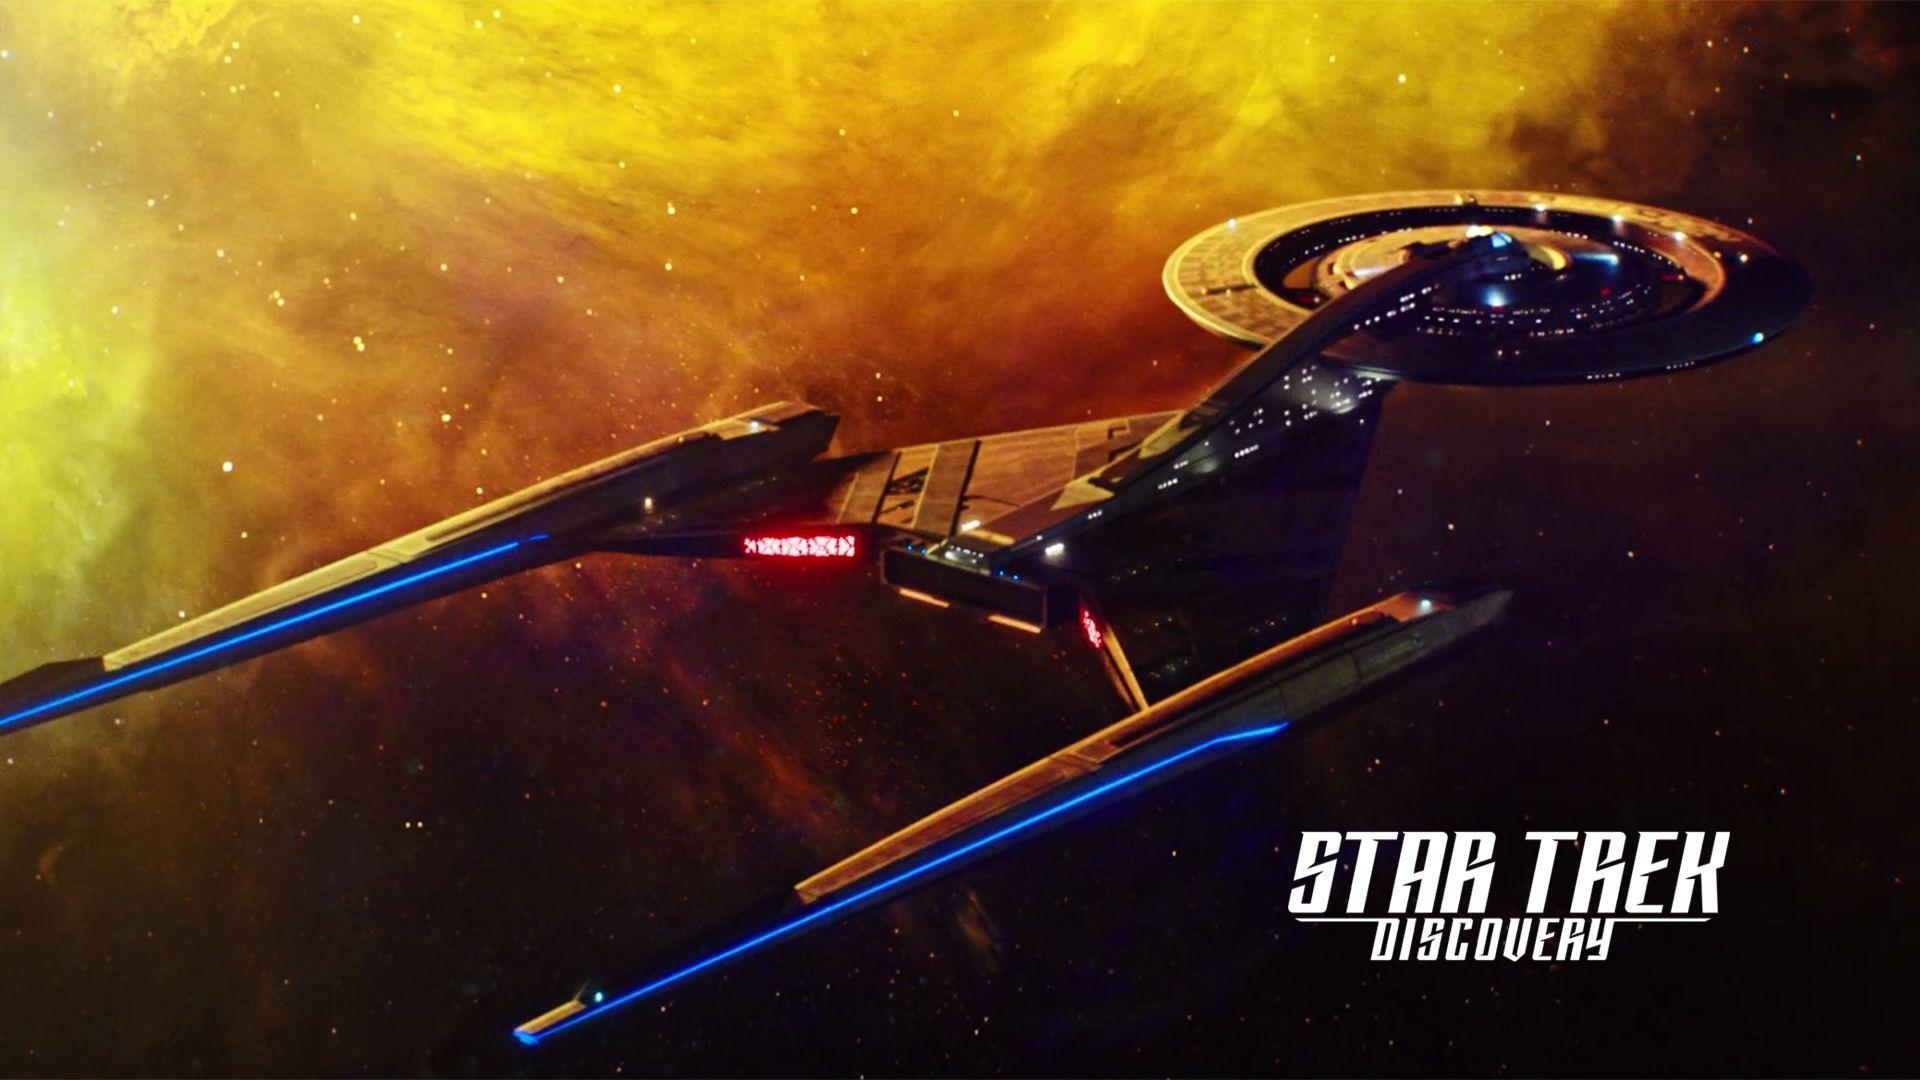 Made a U.S.S. Discovery wallpaper, in one version with and one